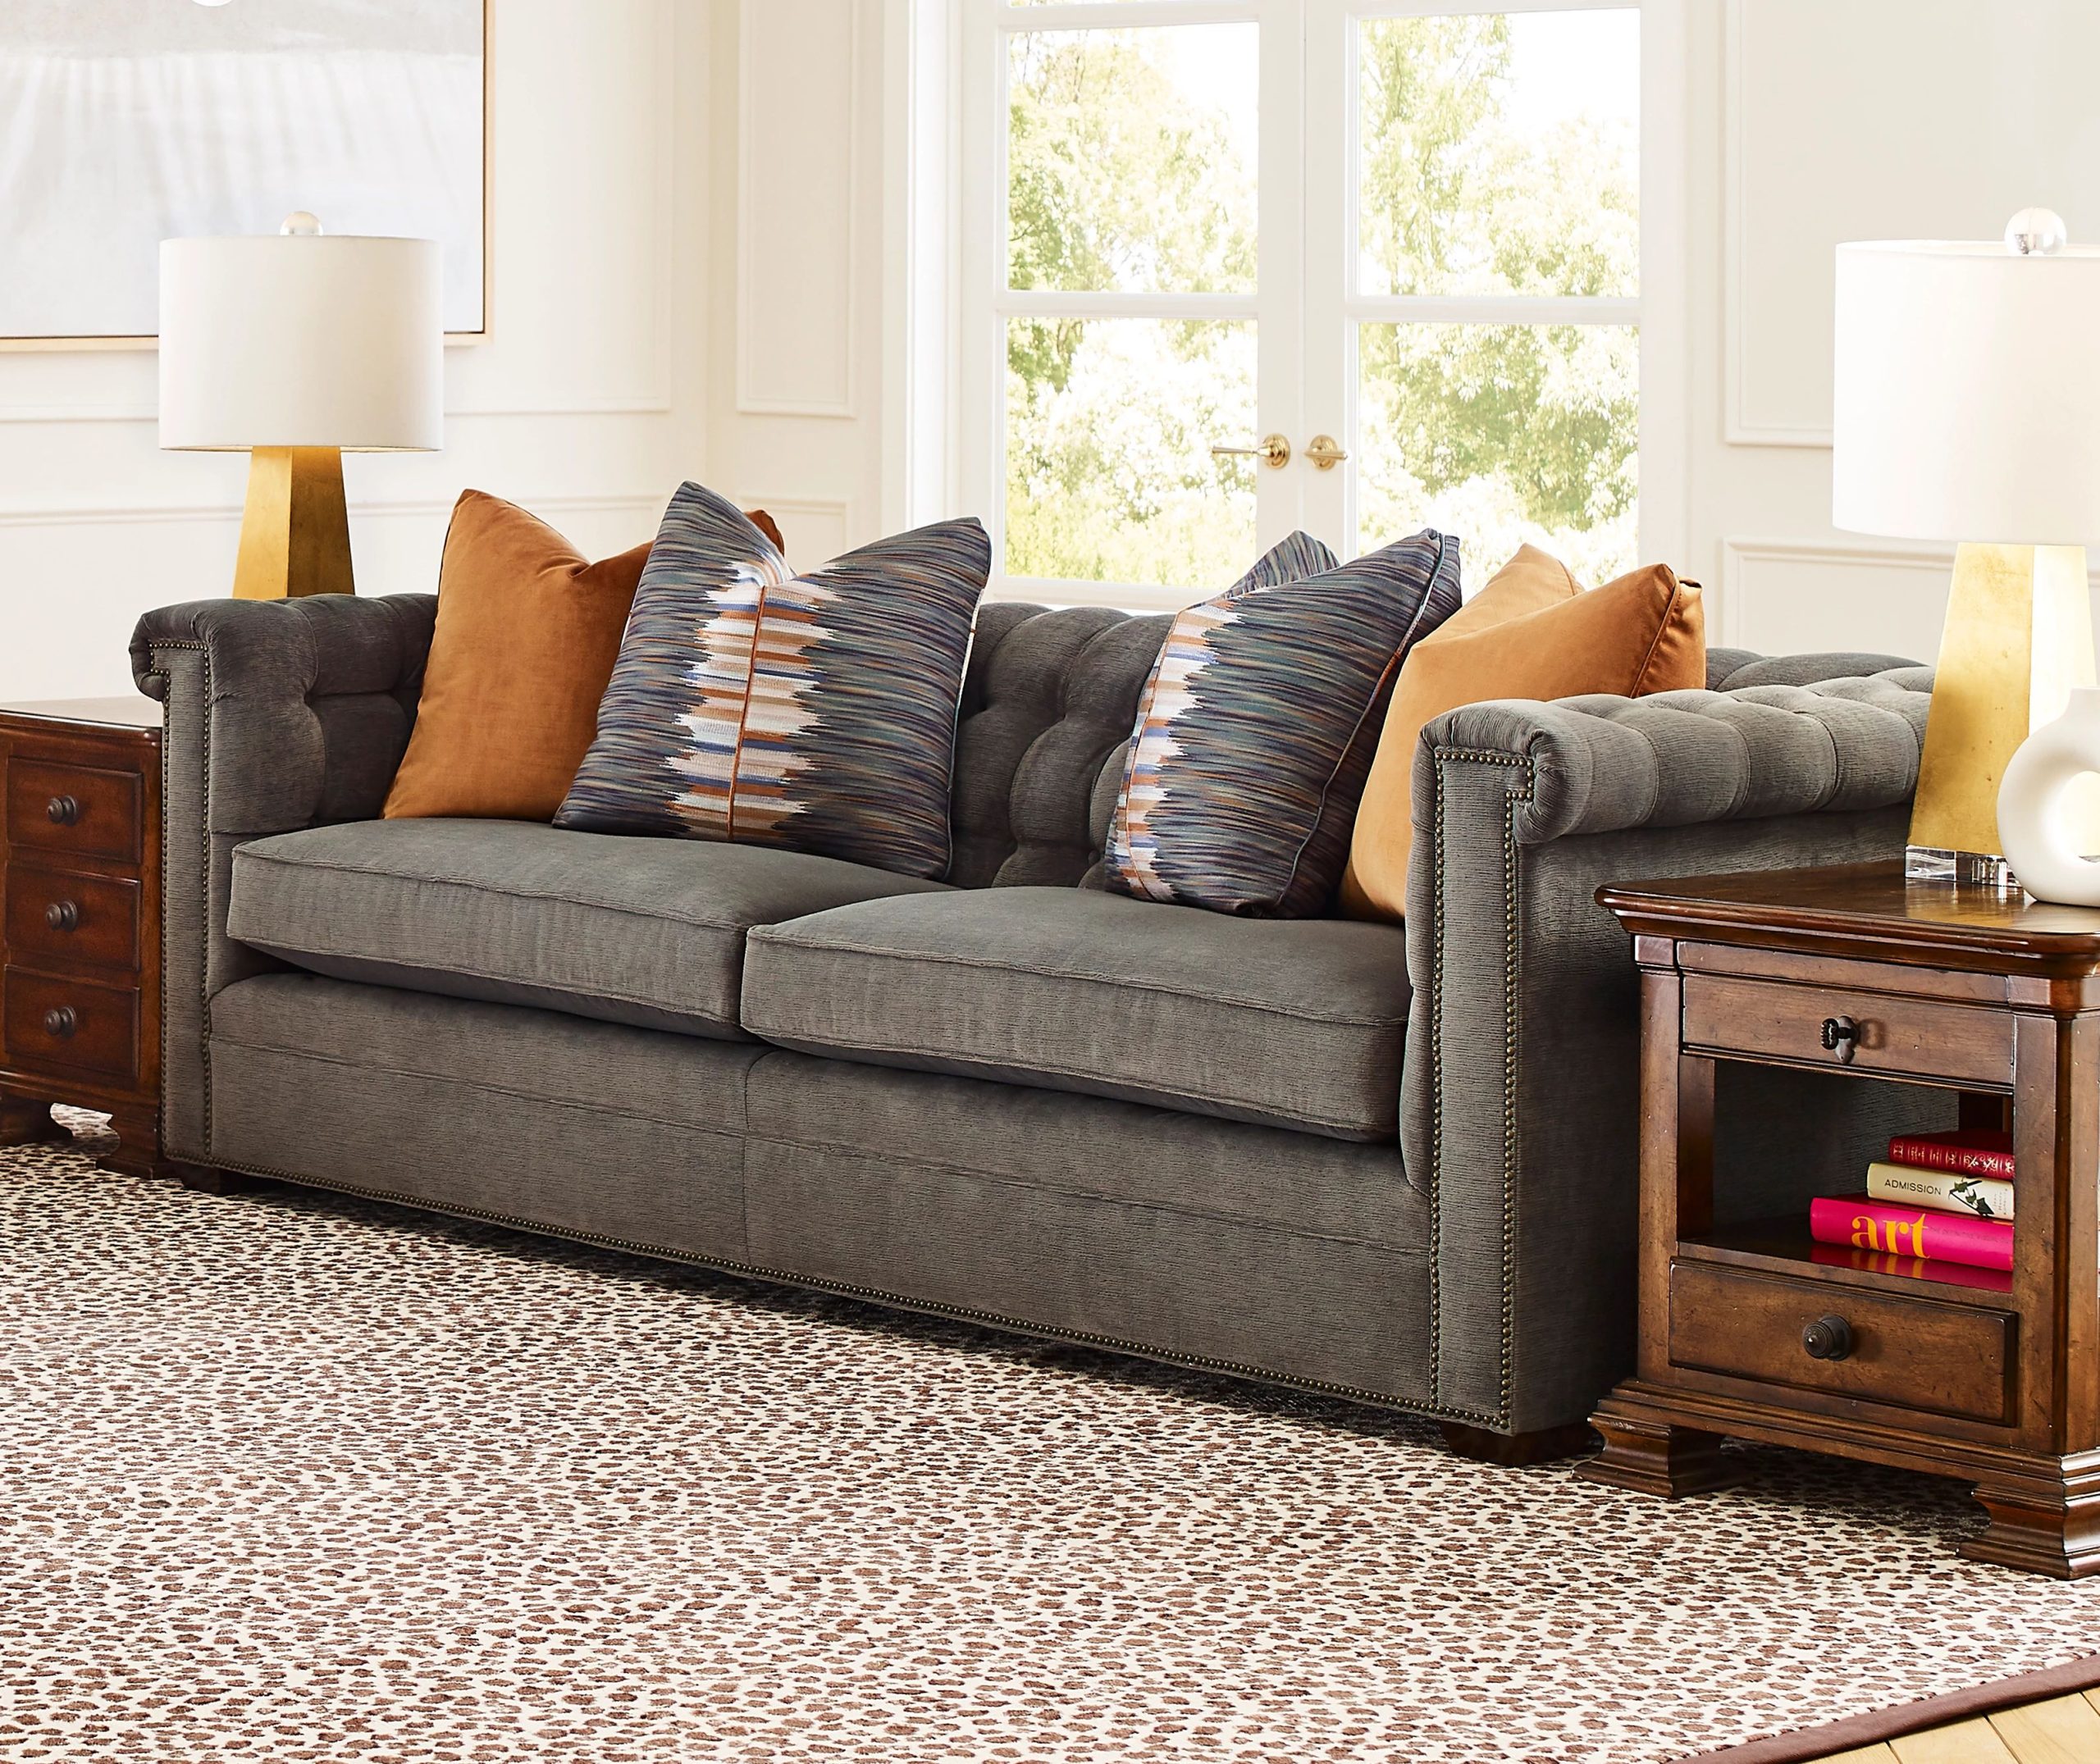 Fall living room decorating ideas from EF Brannon include a Kincaid sofa.